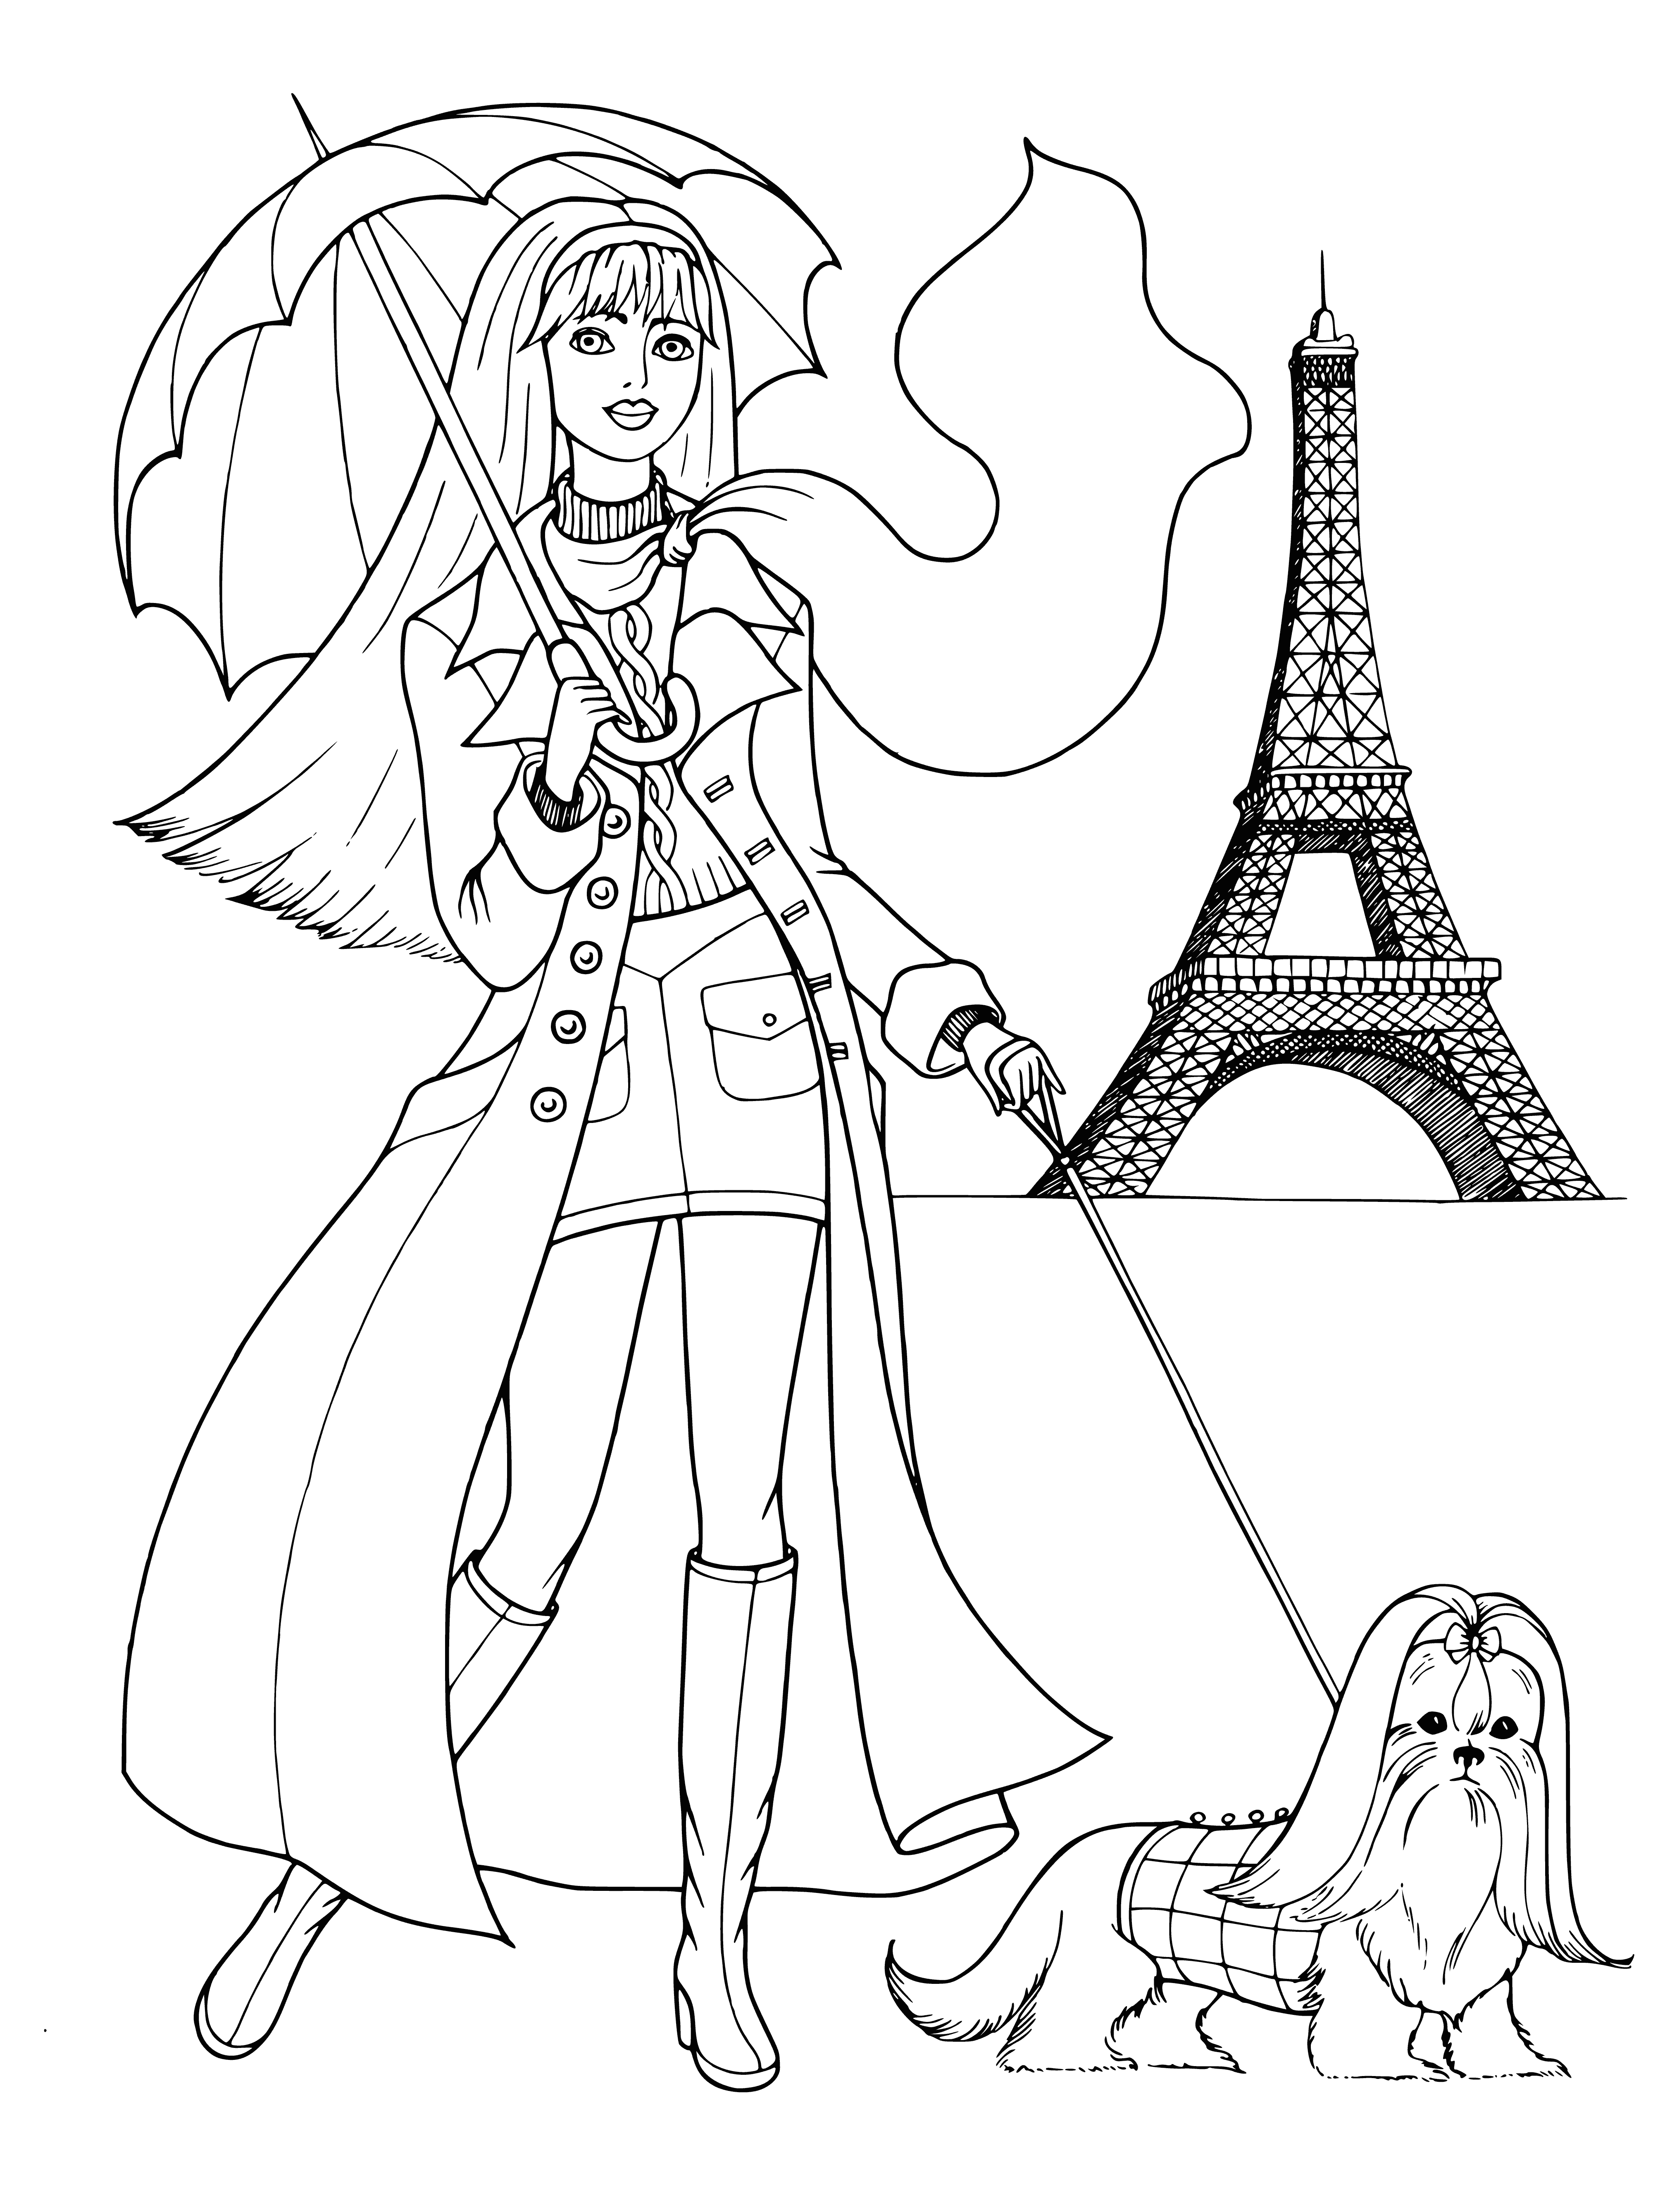 Girl in Paris coloring page